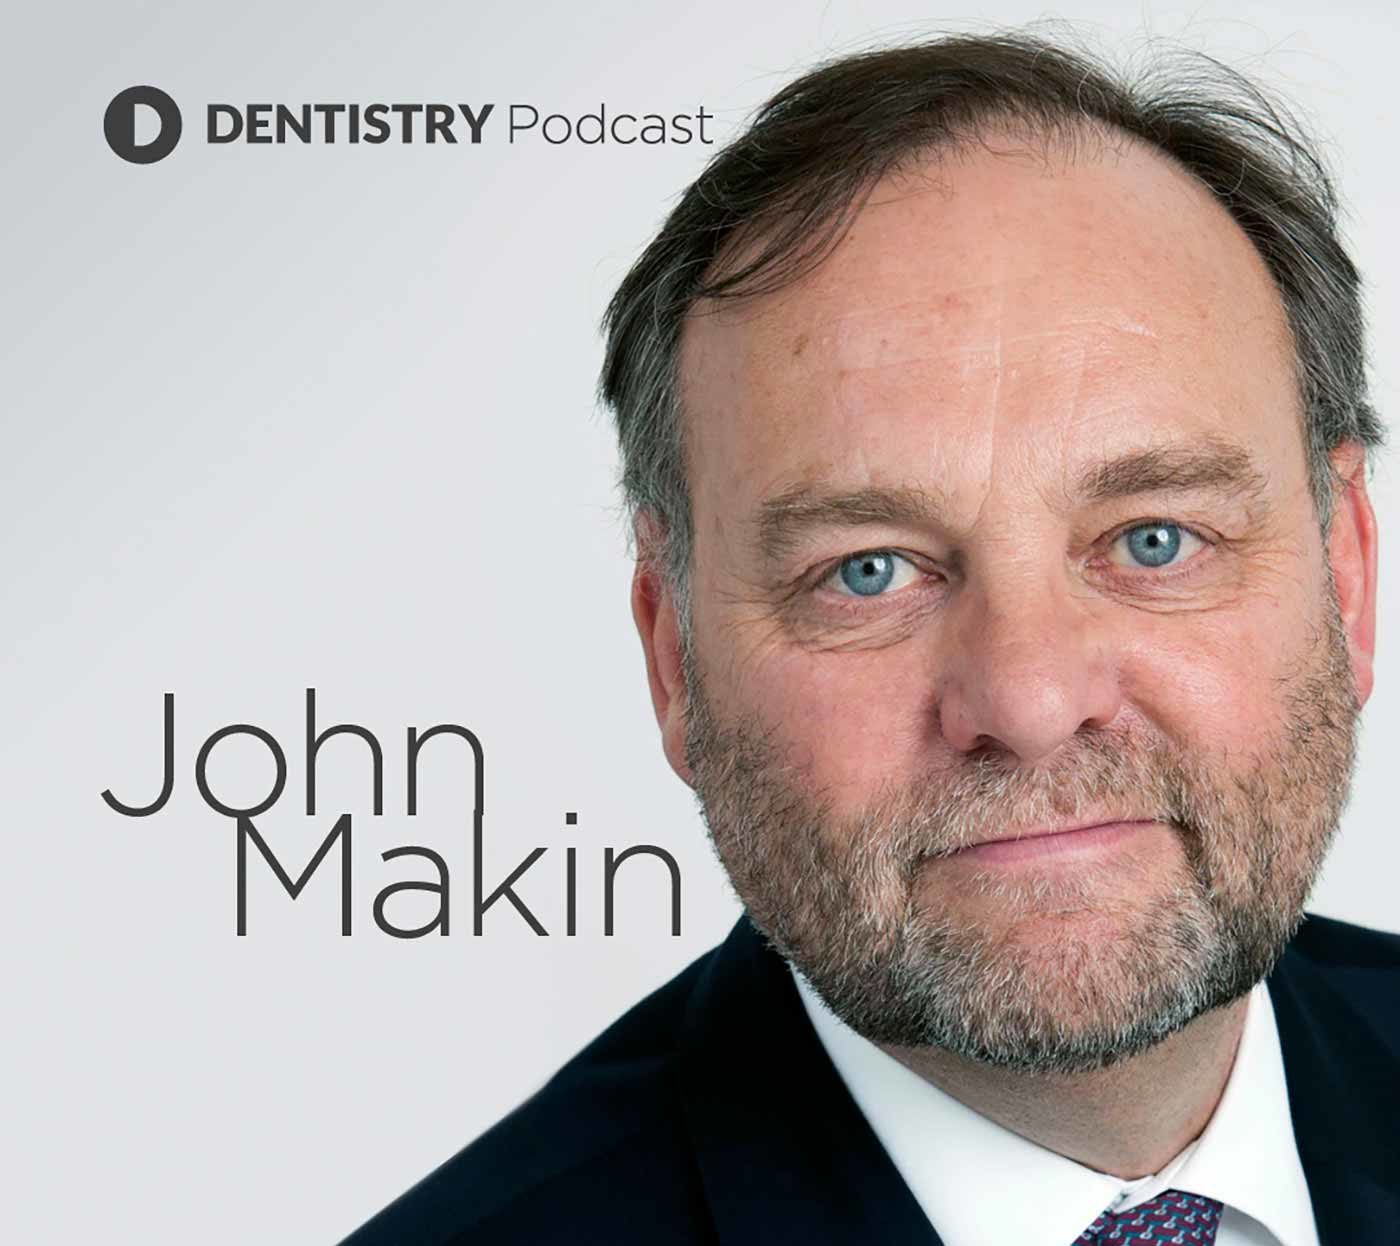 John Makin discusses his journey into dentistry and the key dento-legal questions of the last 12 months